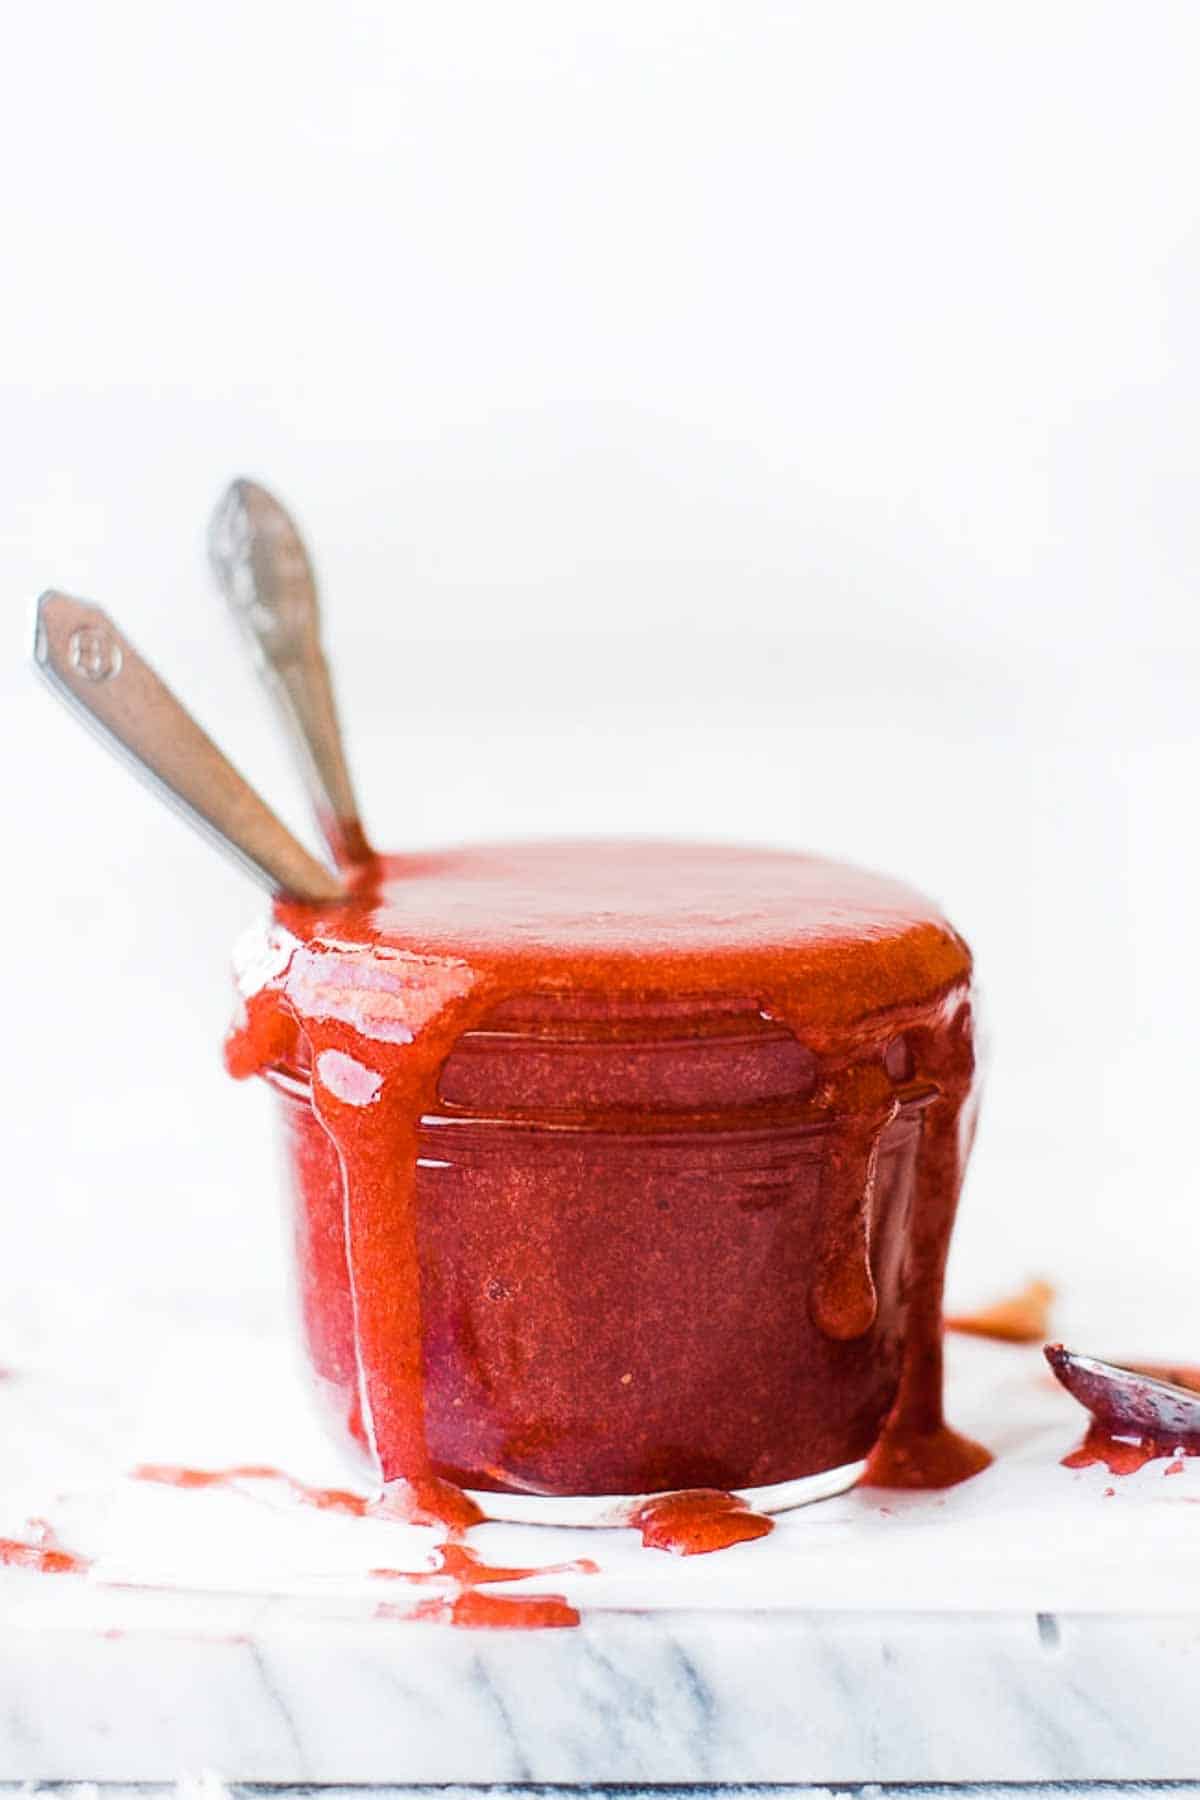 A small jar of homemade jam with two spoons.